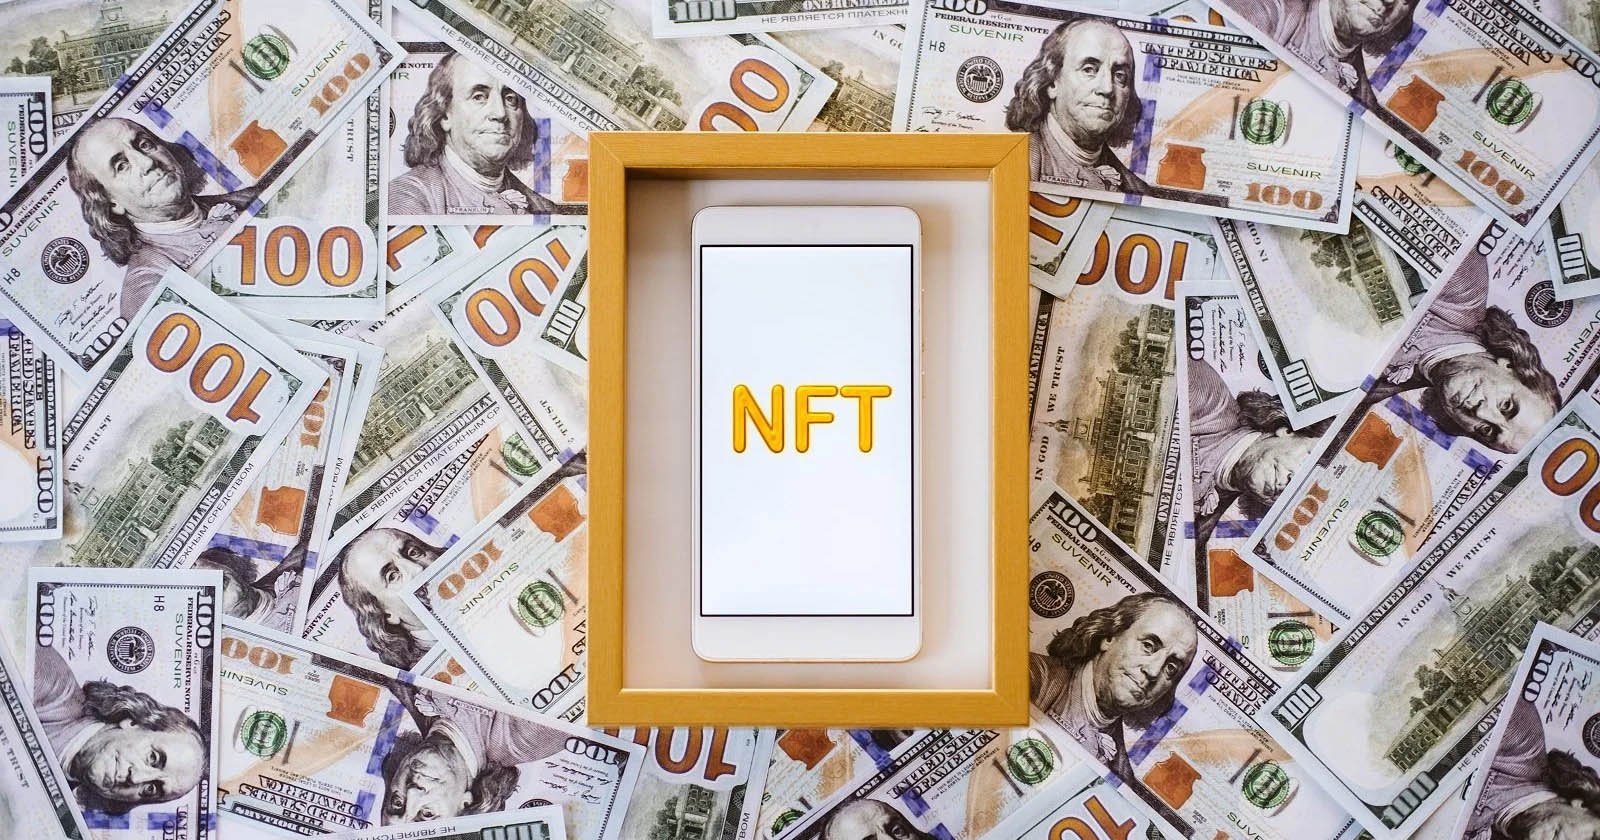 How To Make $10000 With NFT Art